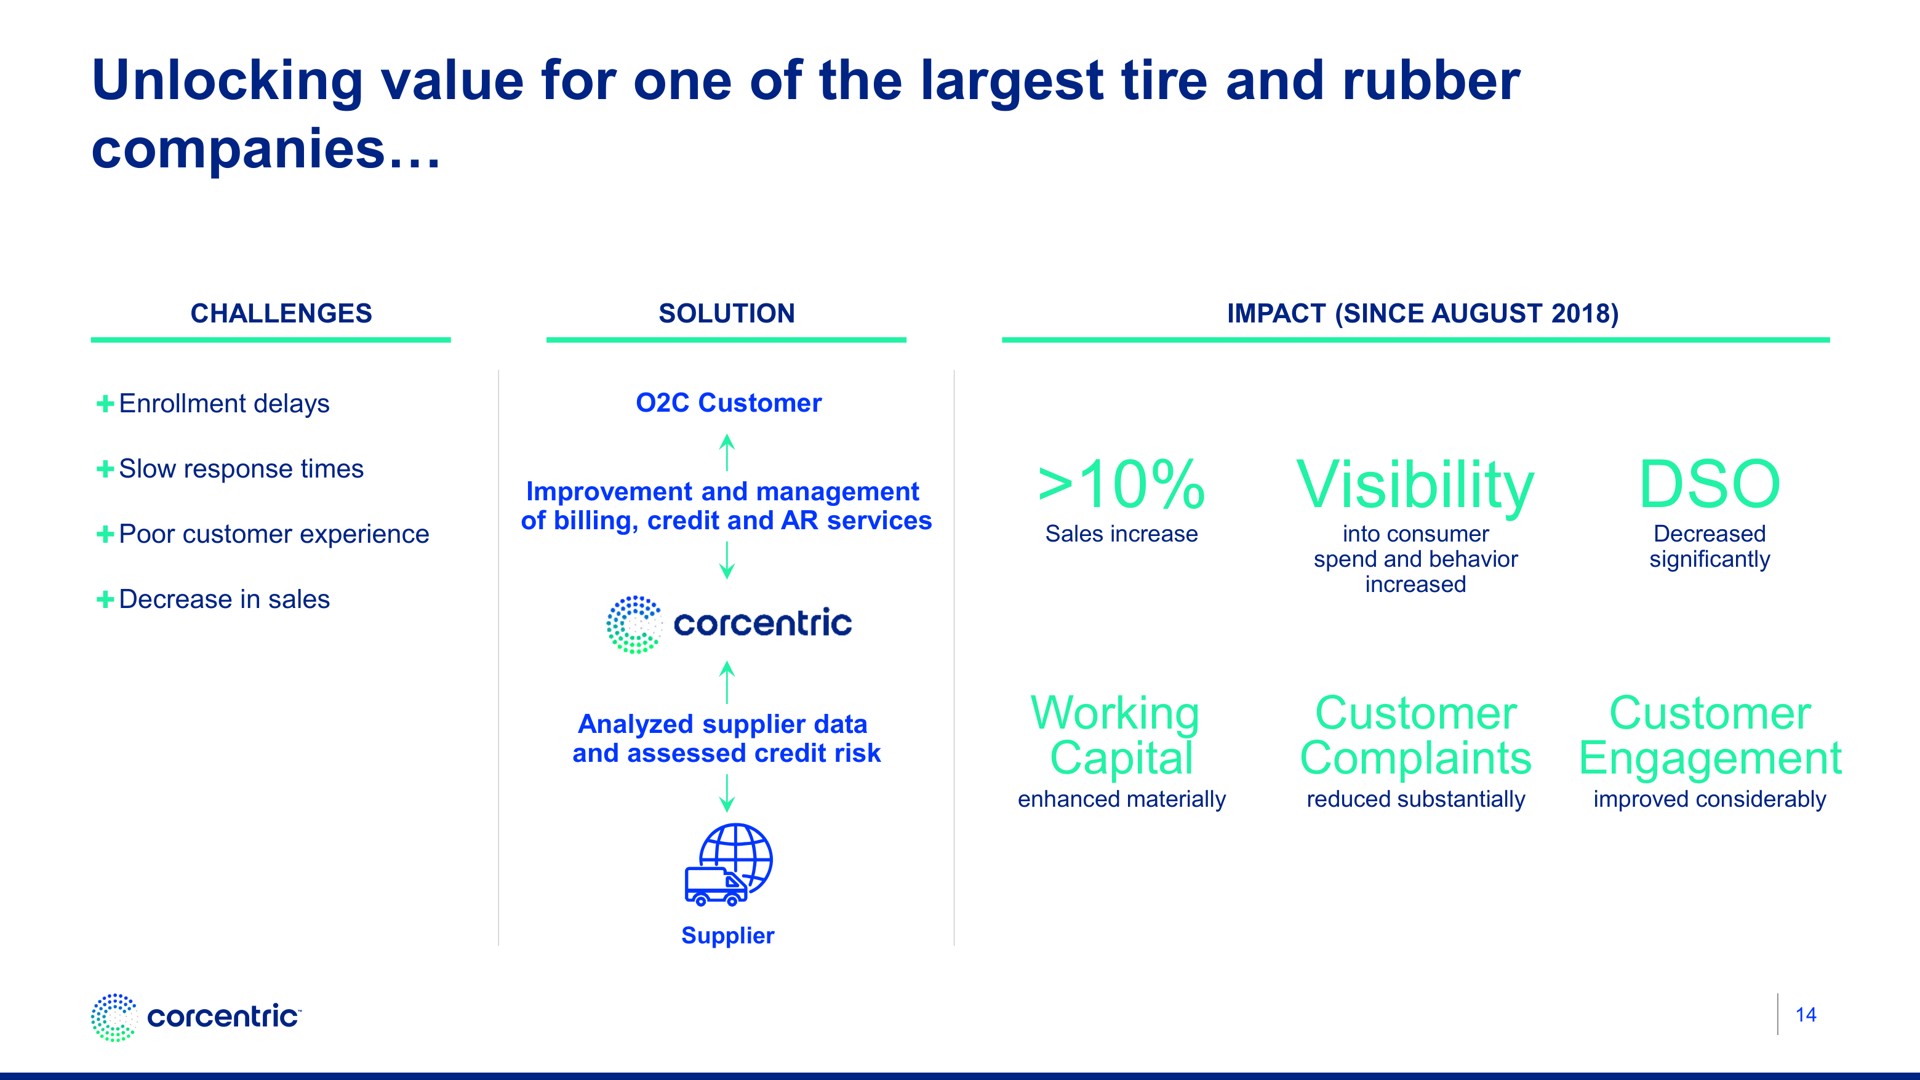 unlocking value for one of the tire and rubber companies visibility working capital customer complaints customer engagement | Corecentric